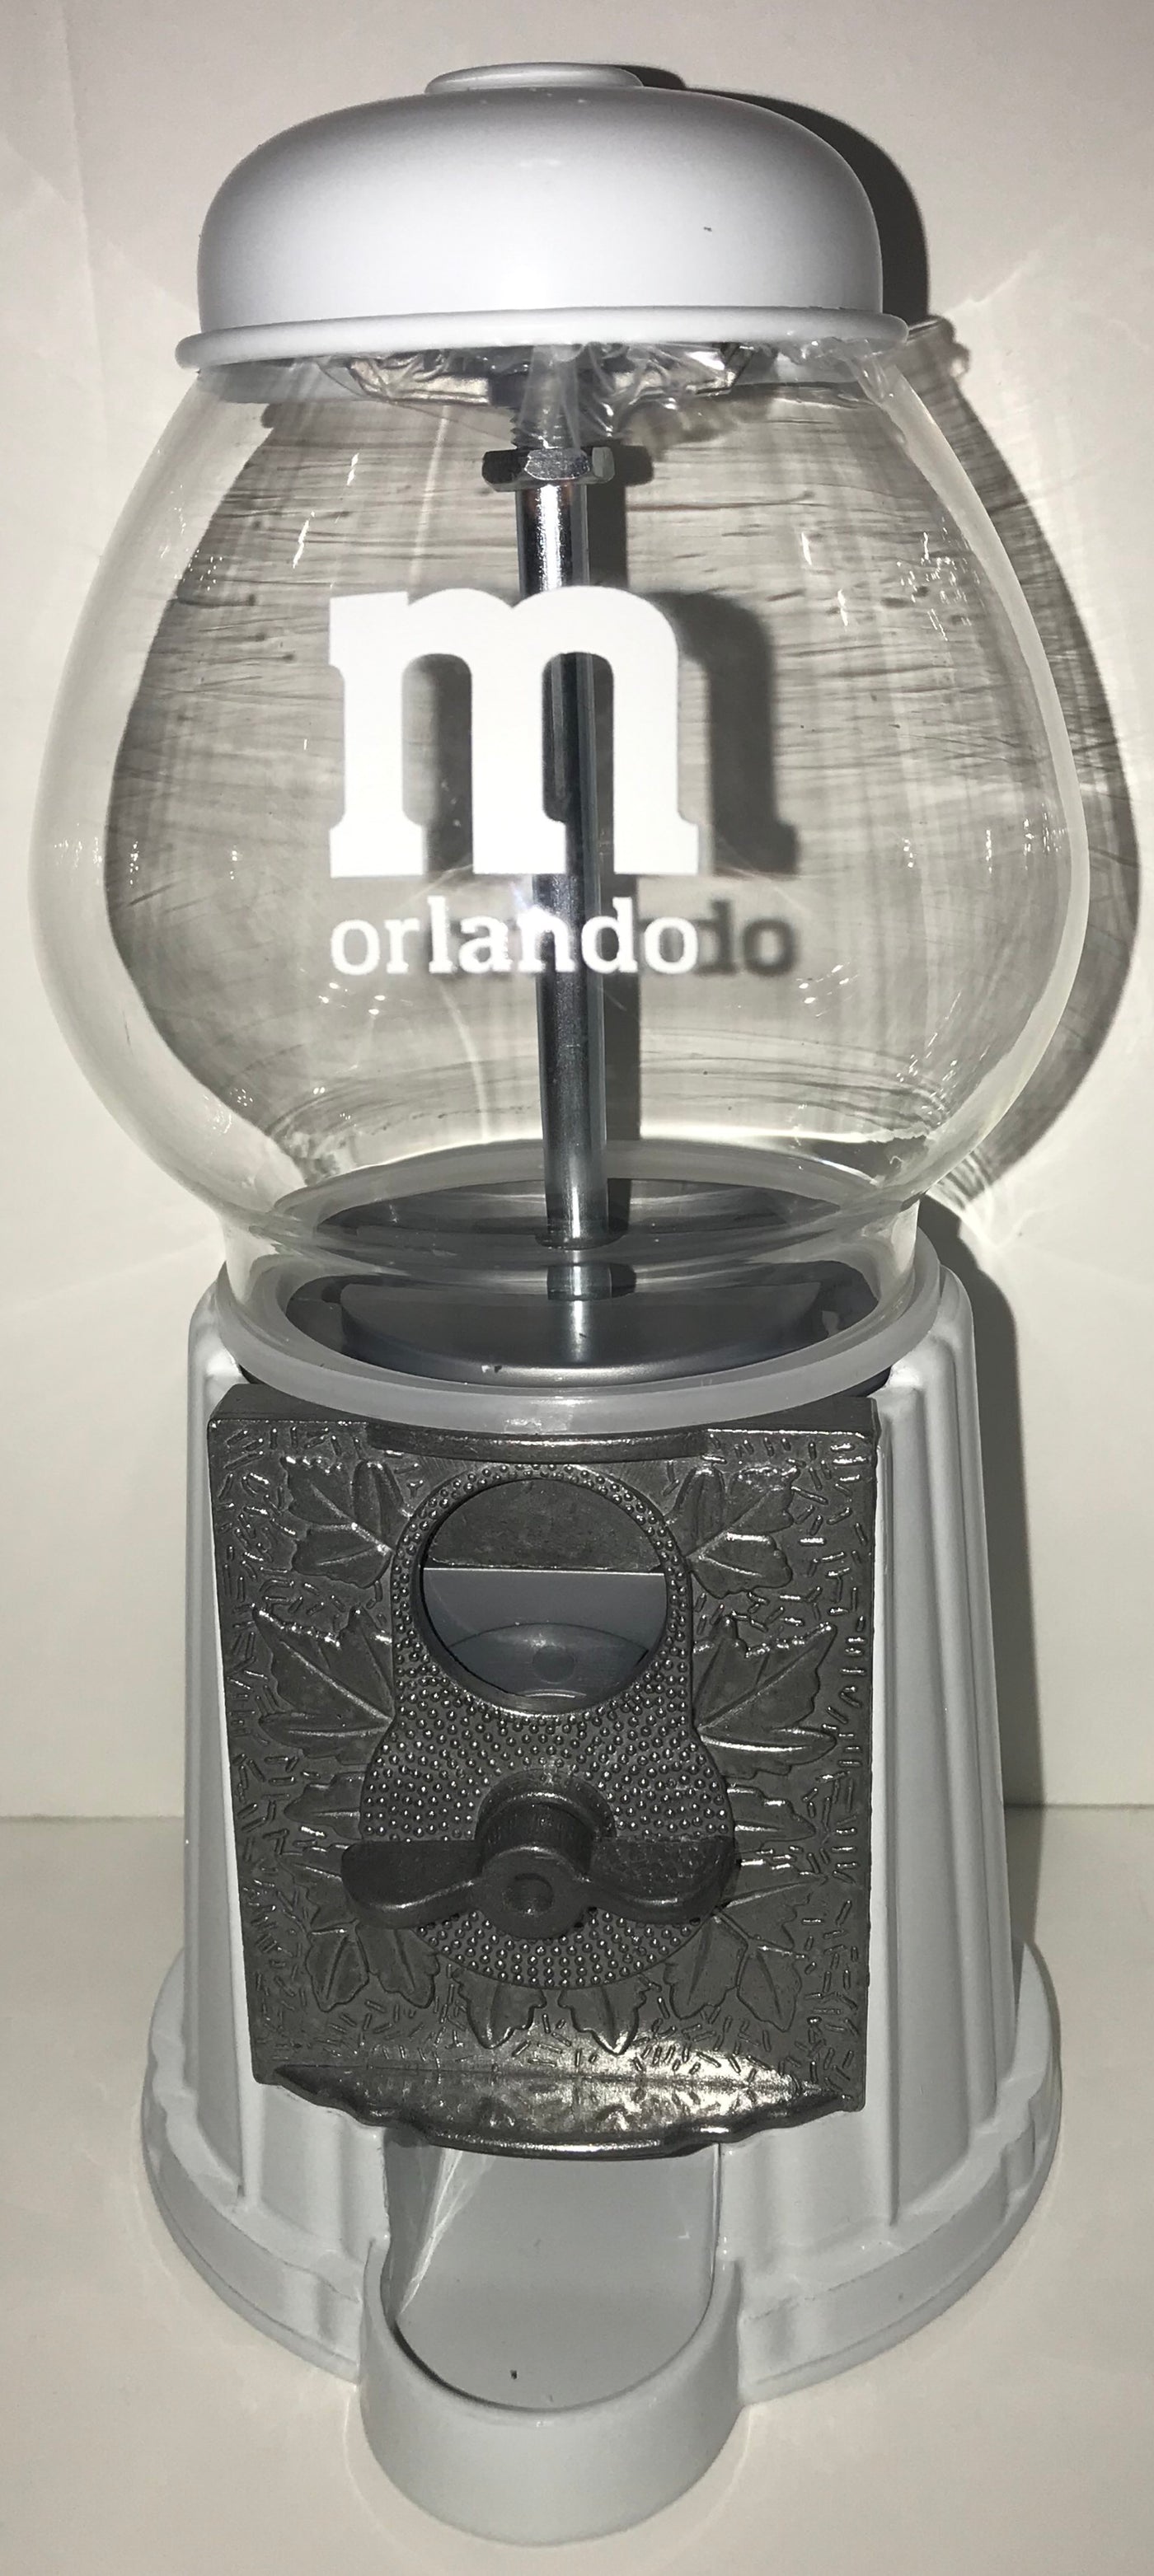 M&M's Orlando Retro Gumball Style Machine Candy Dispenser New with Tags